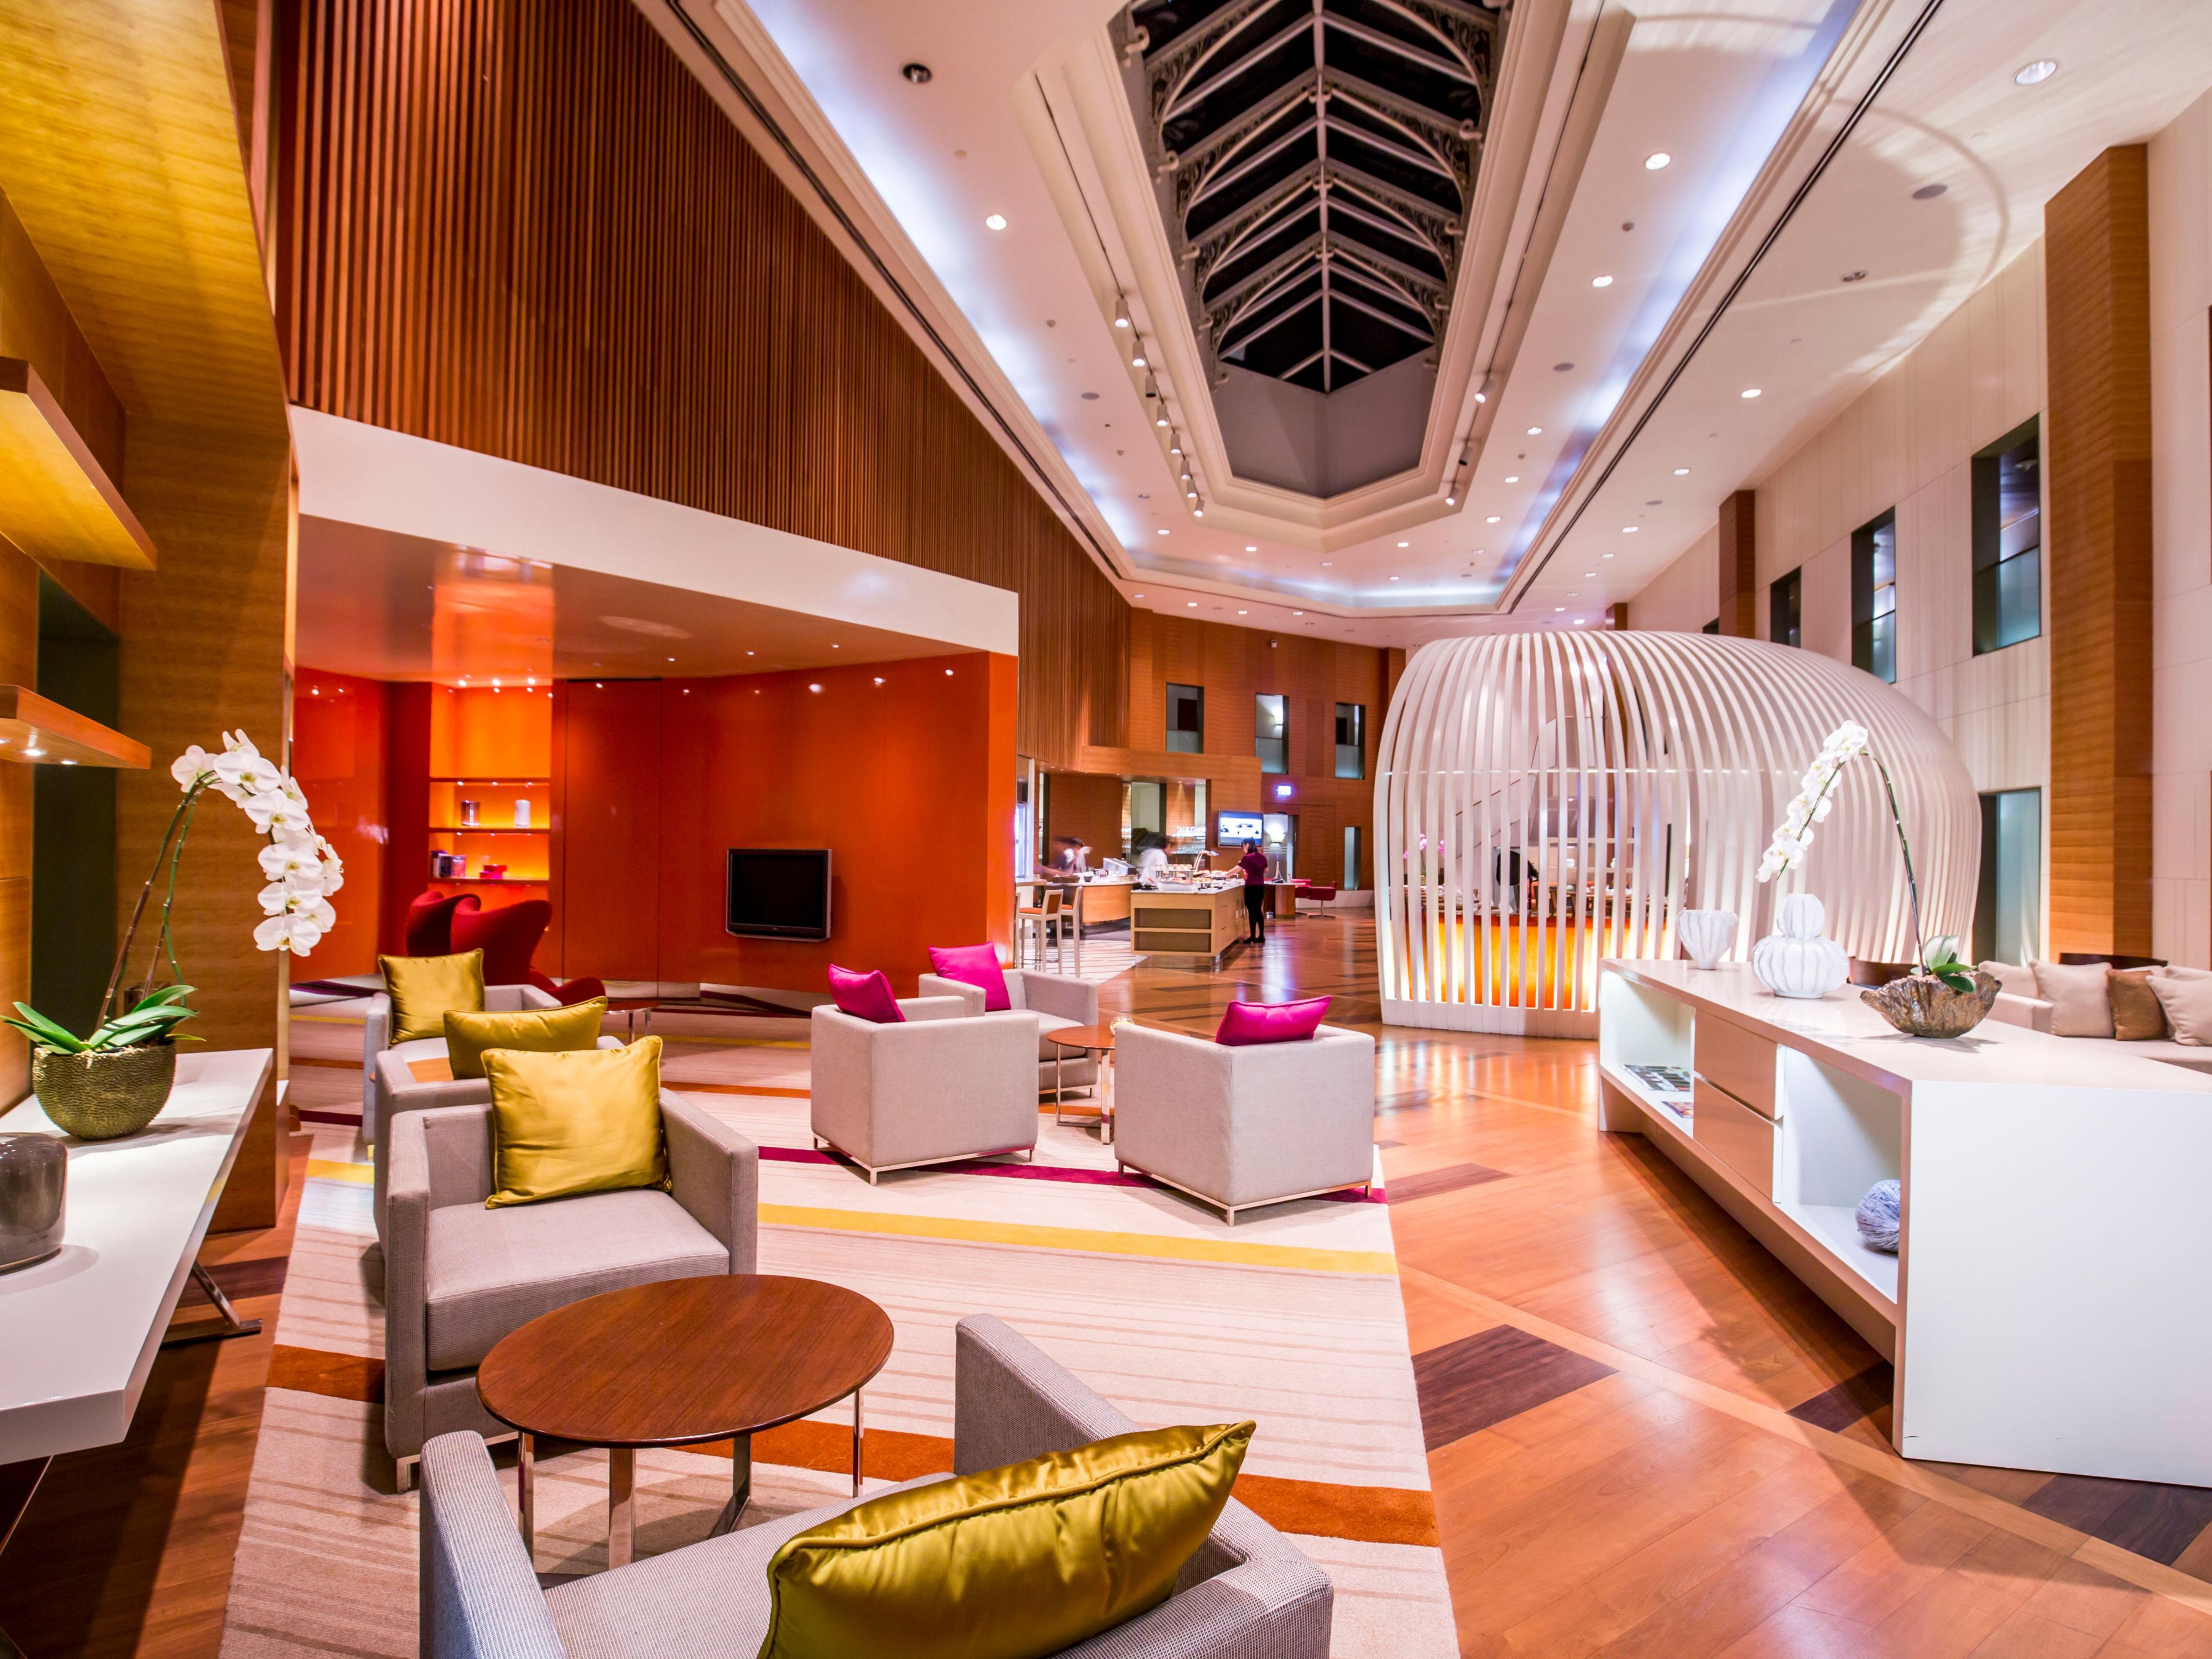 At Crowne Plaza Bangkok Lumpini Park, we provide a range of exclusive privileges which will make your stay completely worthwhile when you choose to stay in the Club rooms or upgrade your stay to include Club Lounge benefits.